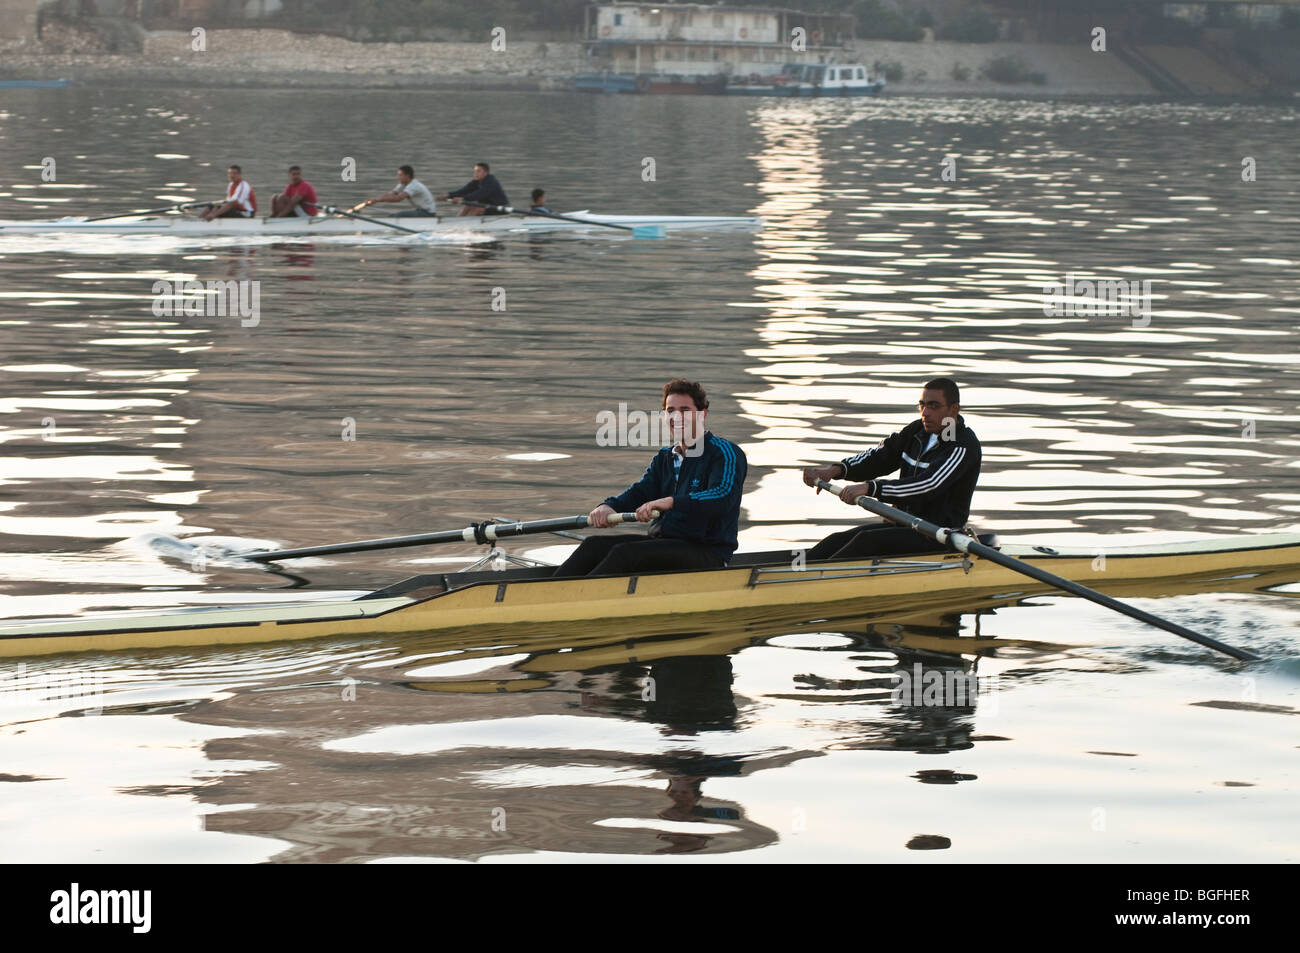 Rowing on the Nile River in Cairo, Egypt, Africa. Stock Photo